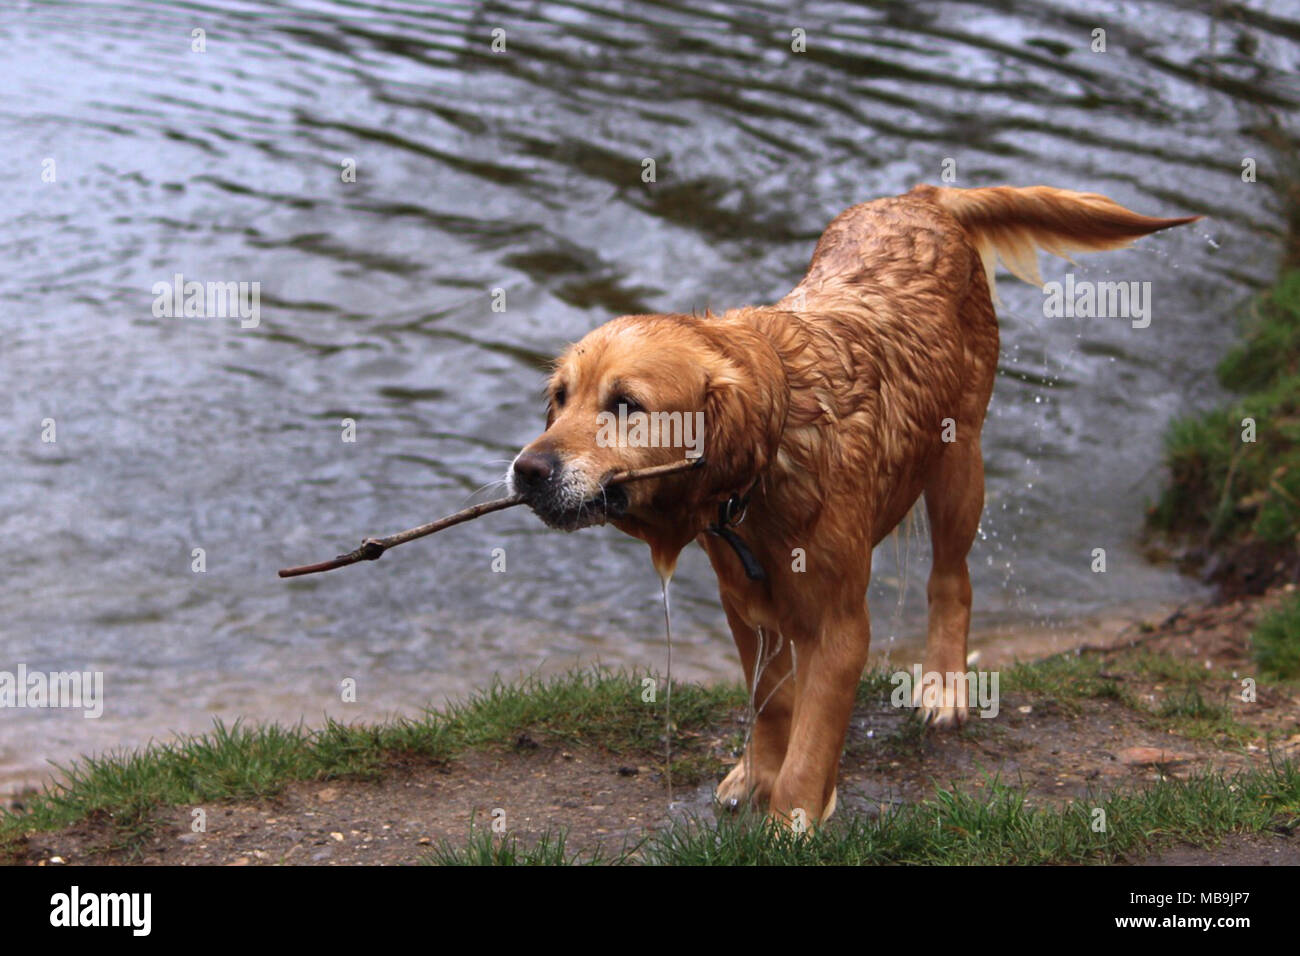 Wet dog, after retrieving stick from lake Stock Photo